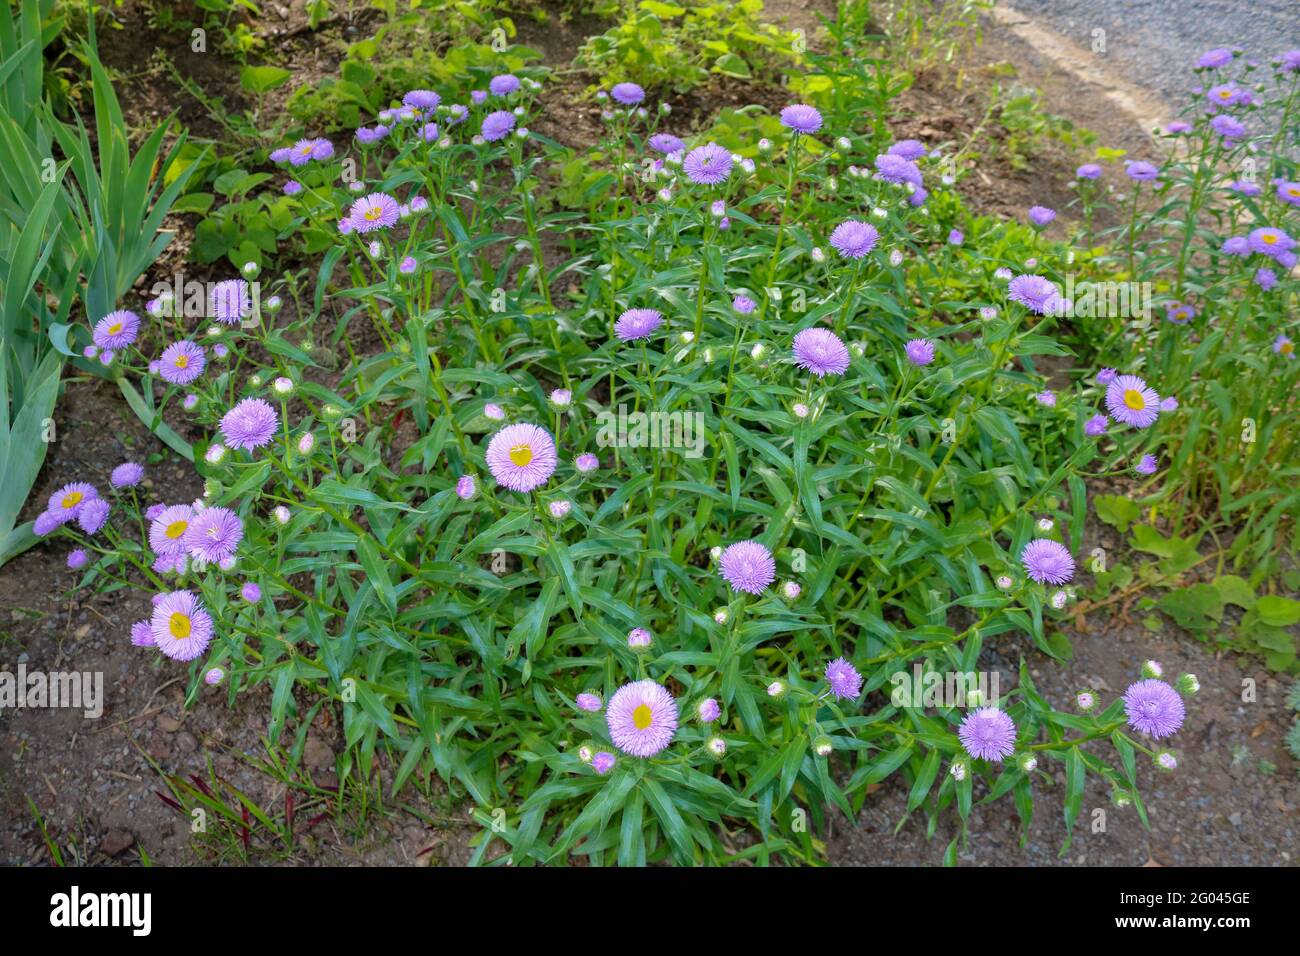 Bush of purple aster flowers on the ground in spring in Germany Stock Photo